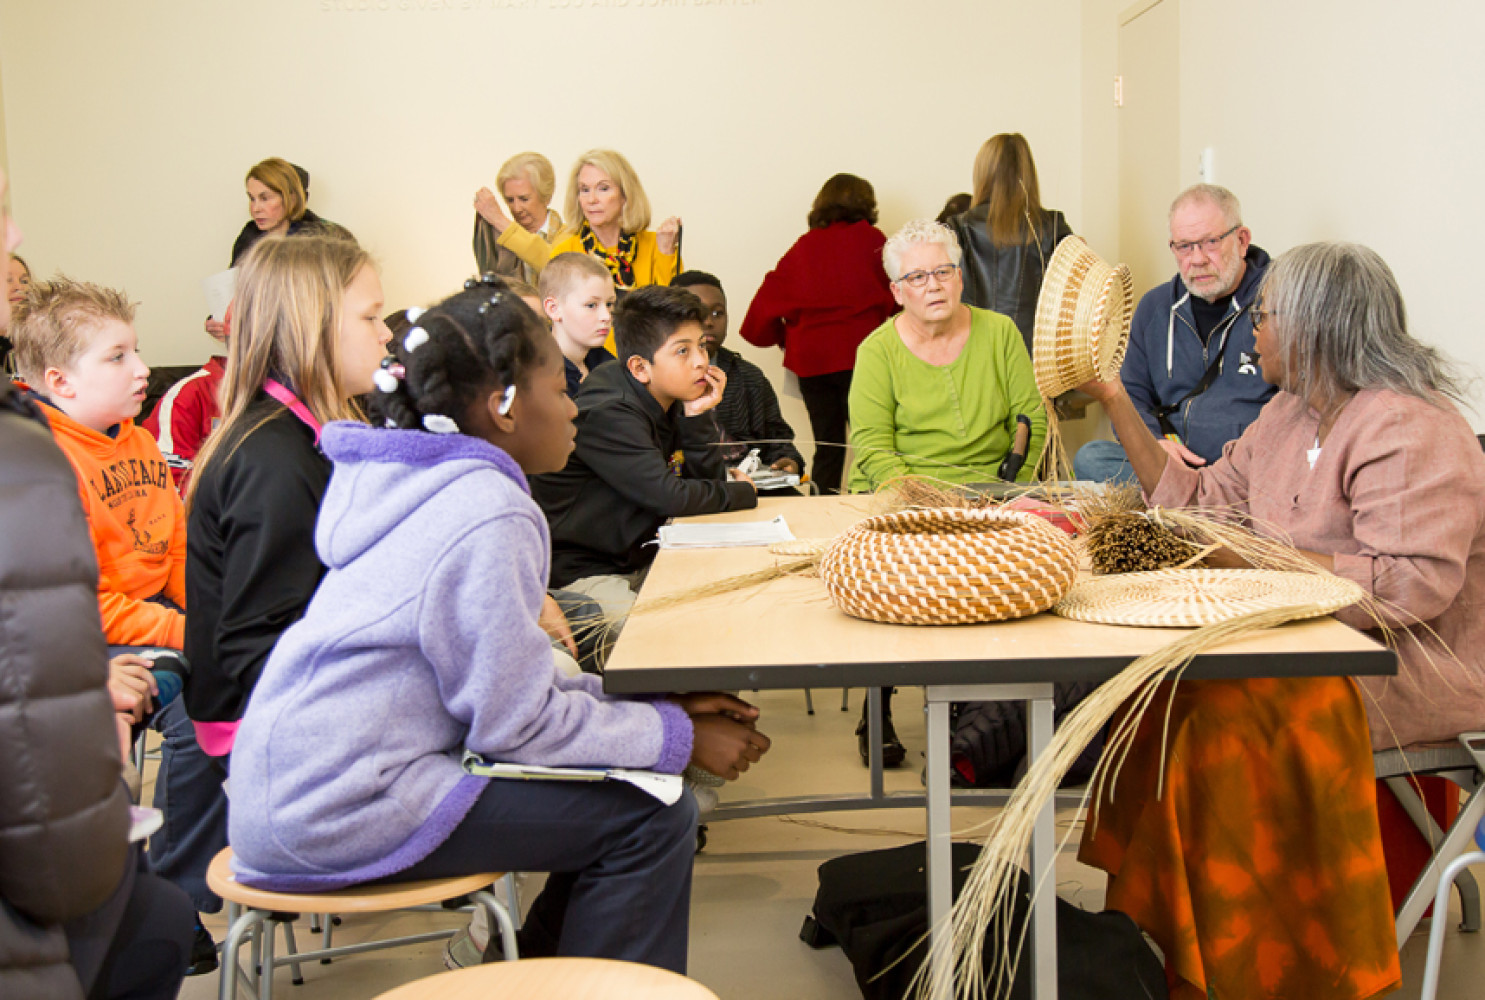 Mary Jackson demonstrates her sweetgrass basket weaving techniques to students and Museum visitors. Image courtesy of MCG Photography. 